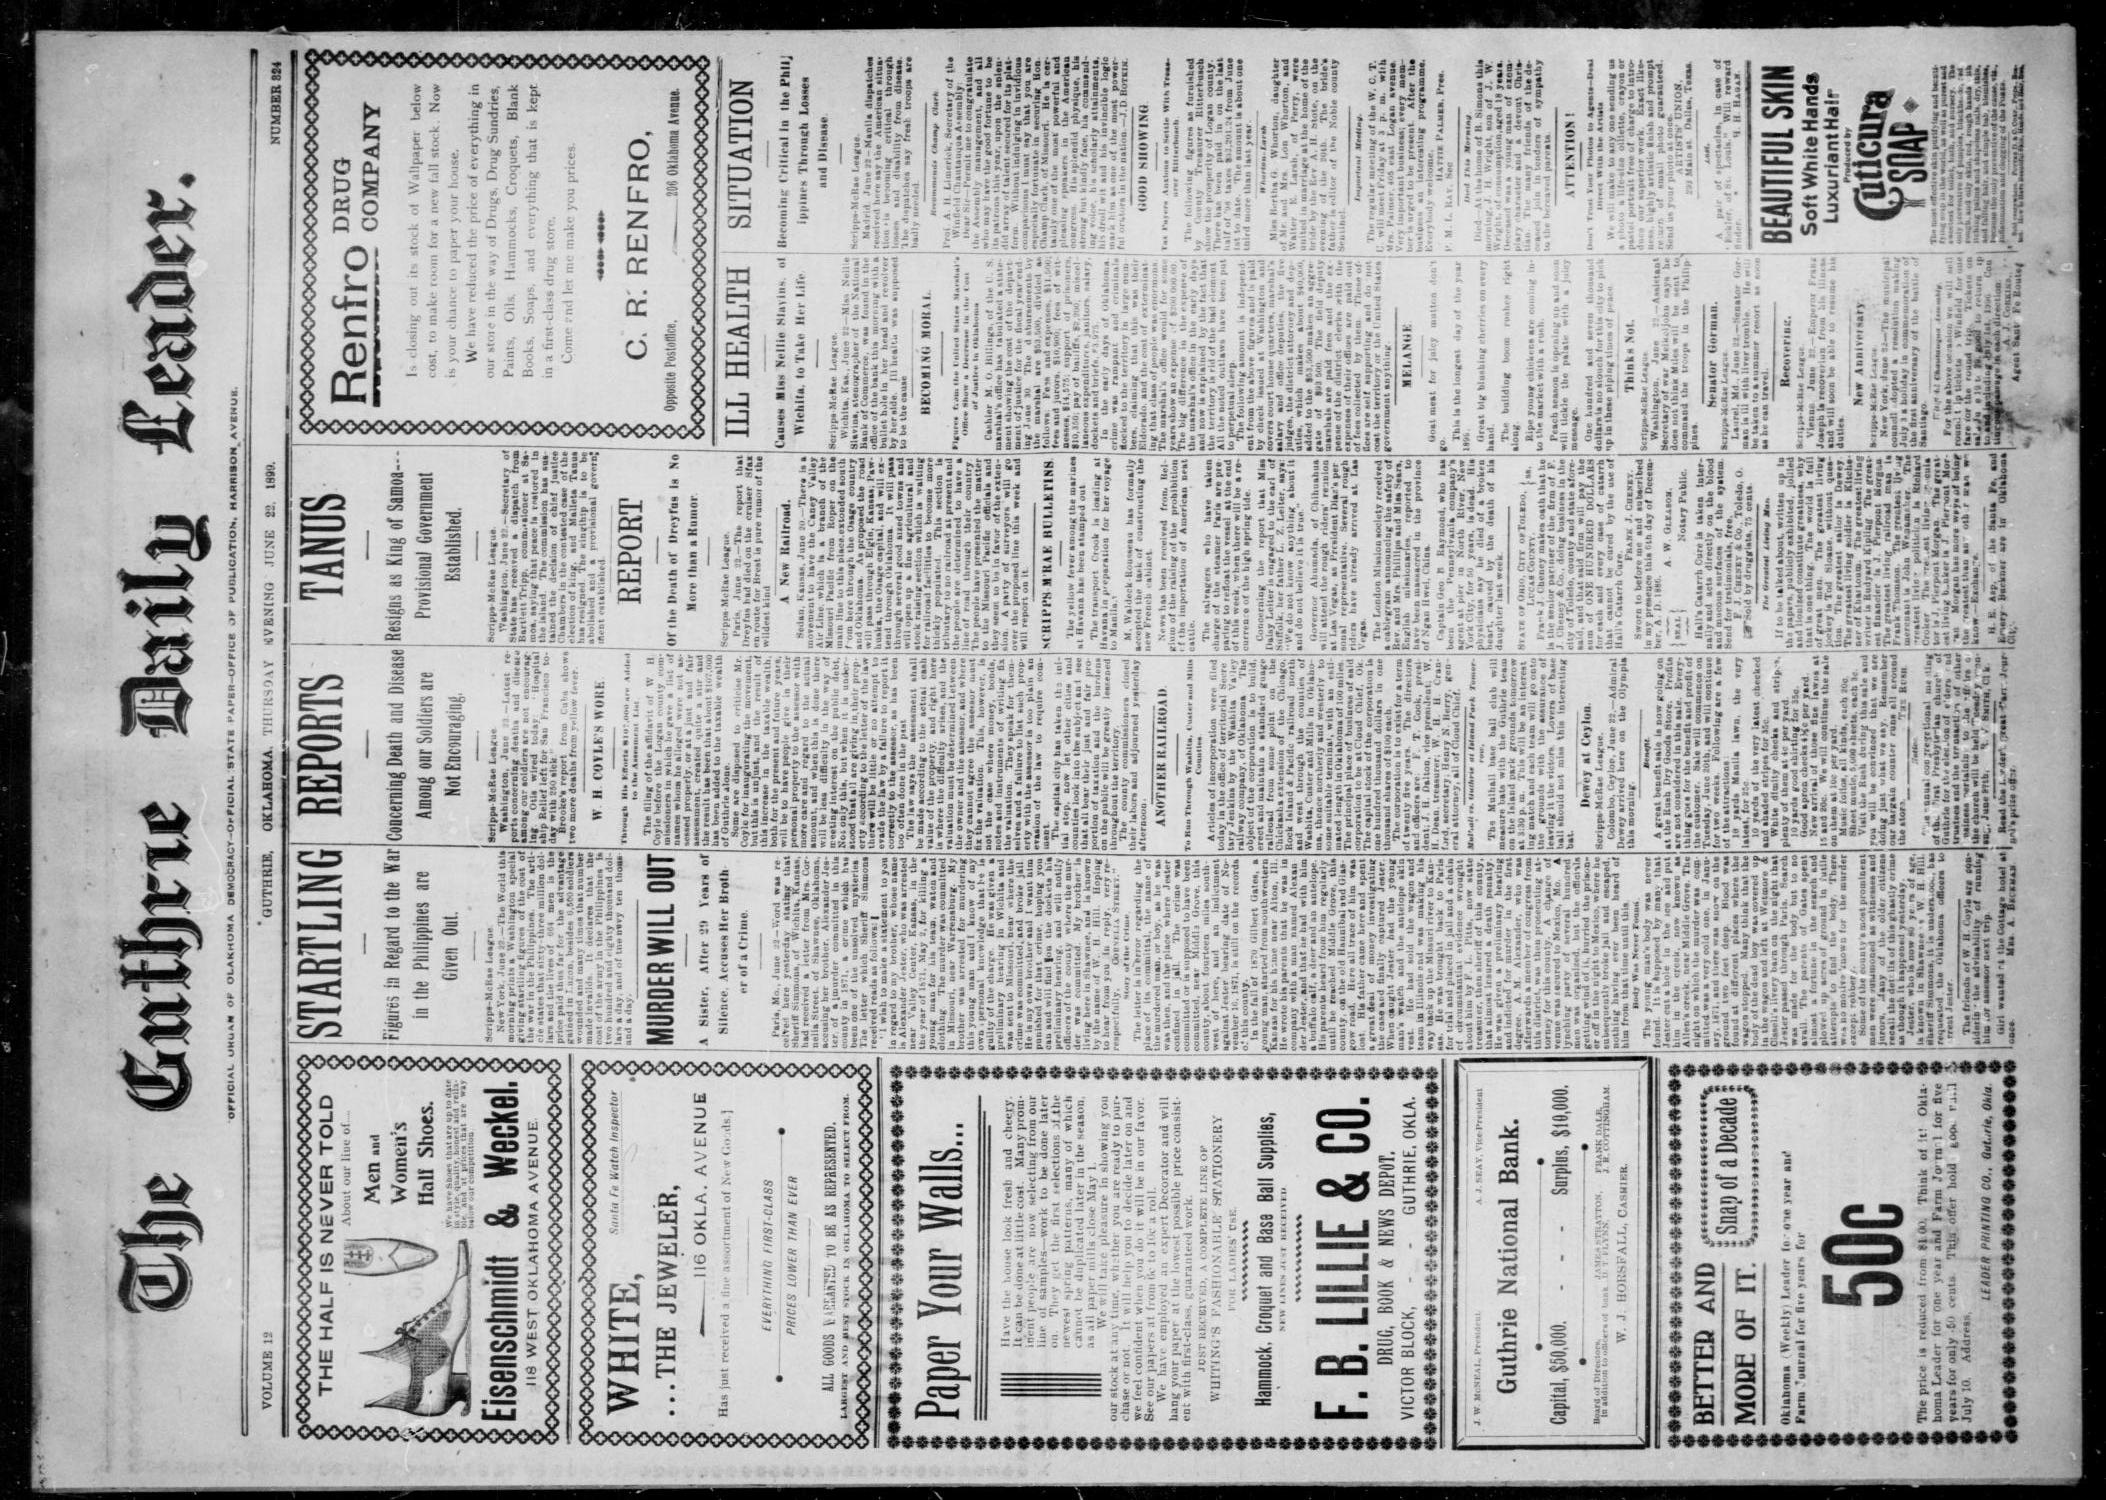 The Guthrie Daily Leader. (Guthrie, Okla.), Vol. 12, No. 324, Ed. 1, Thursday, June 22, 1899
                                                
                                                    [Sequence #]: 1 of 4
                                                